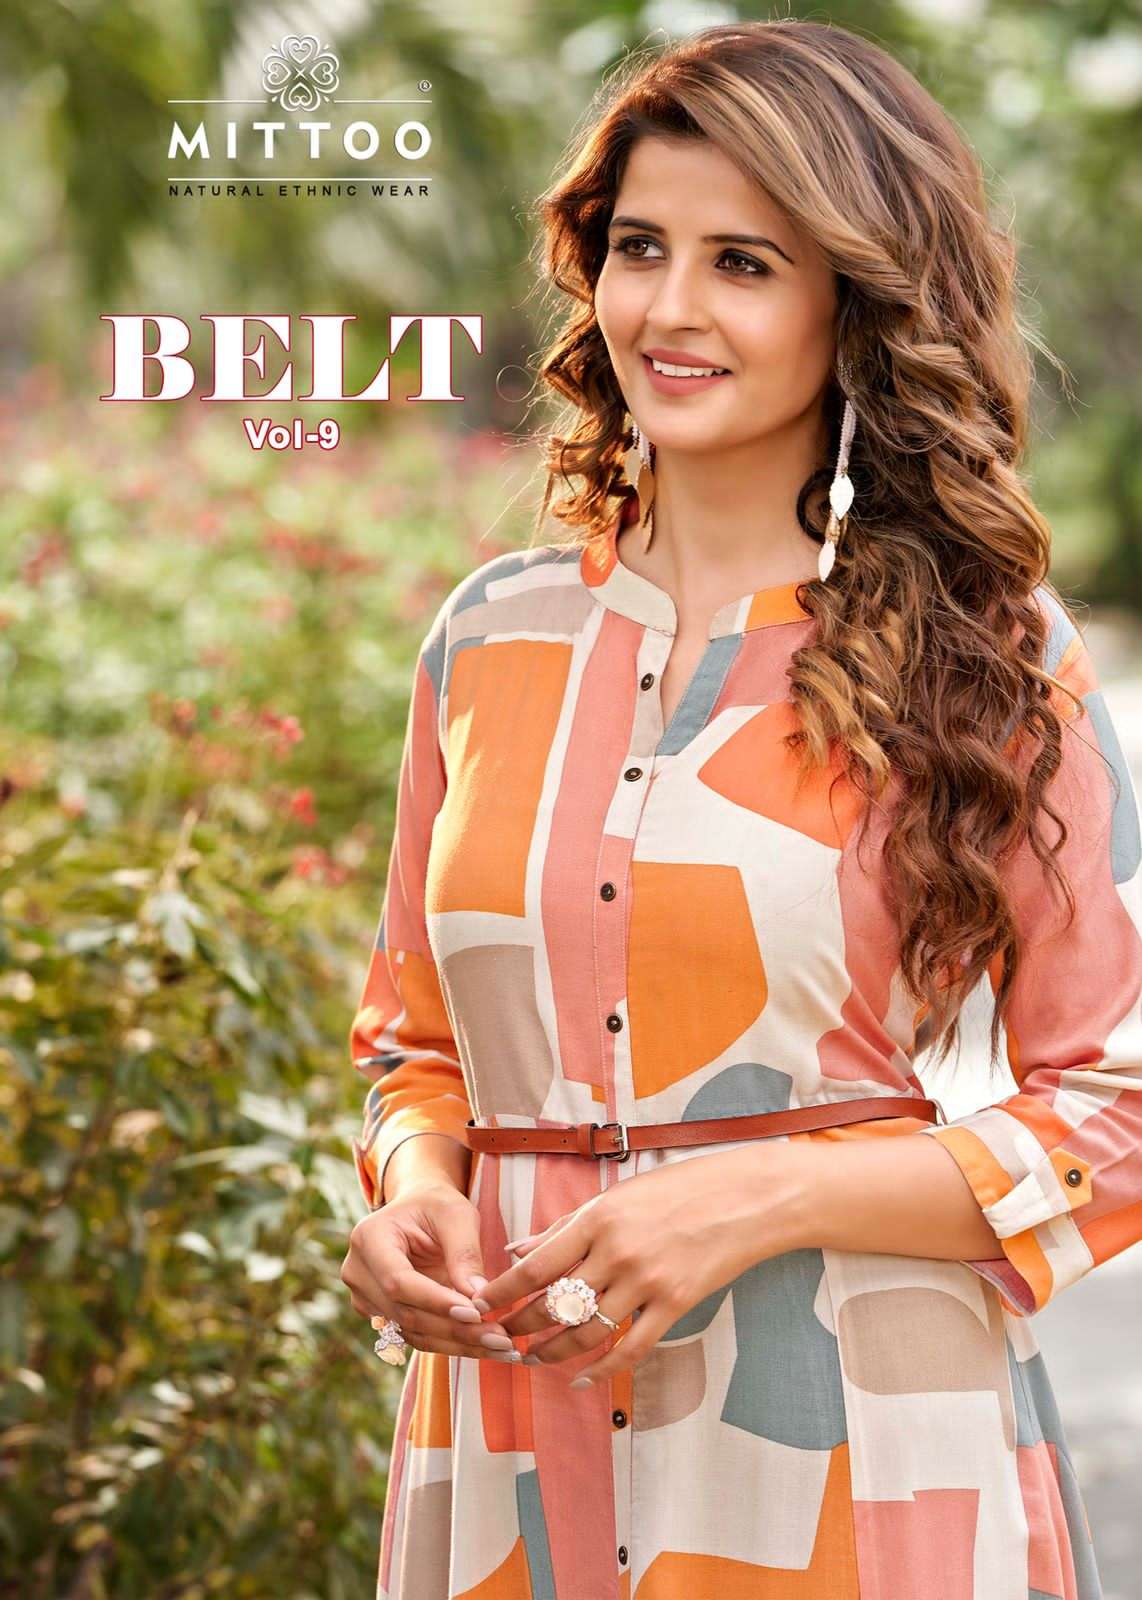 BELT VOL 9 BY MITTOO BRAND HEAVY RAYON WIRH FANCY PRINT FROCK STYLE KURTI WITH BELT WHOLESALER AND D...